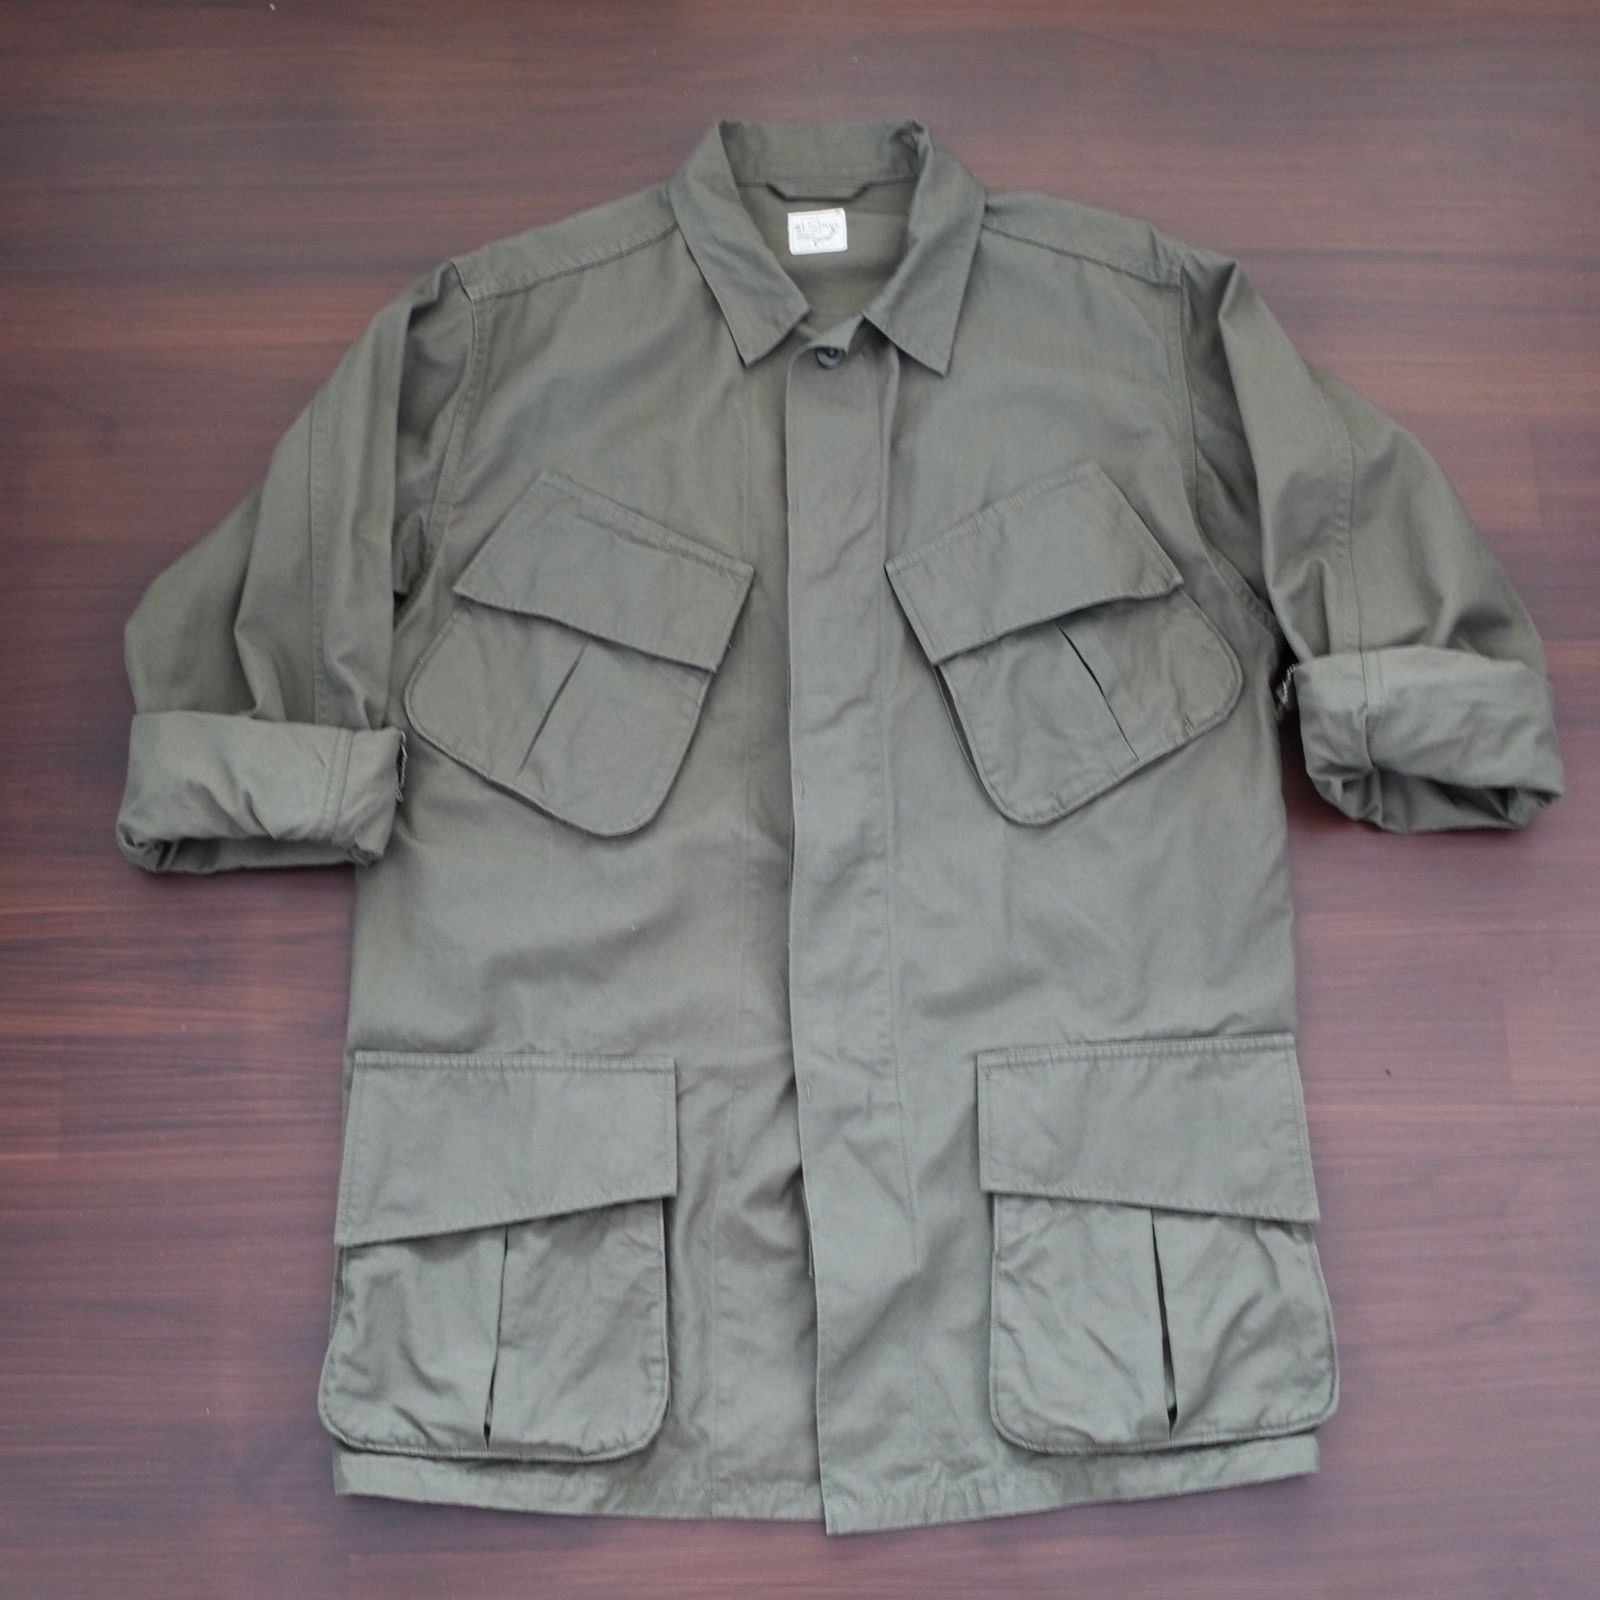 Orslow US Army Tropical Combat Coat | Grailed